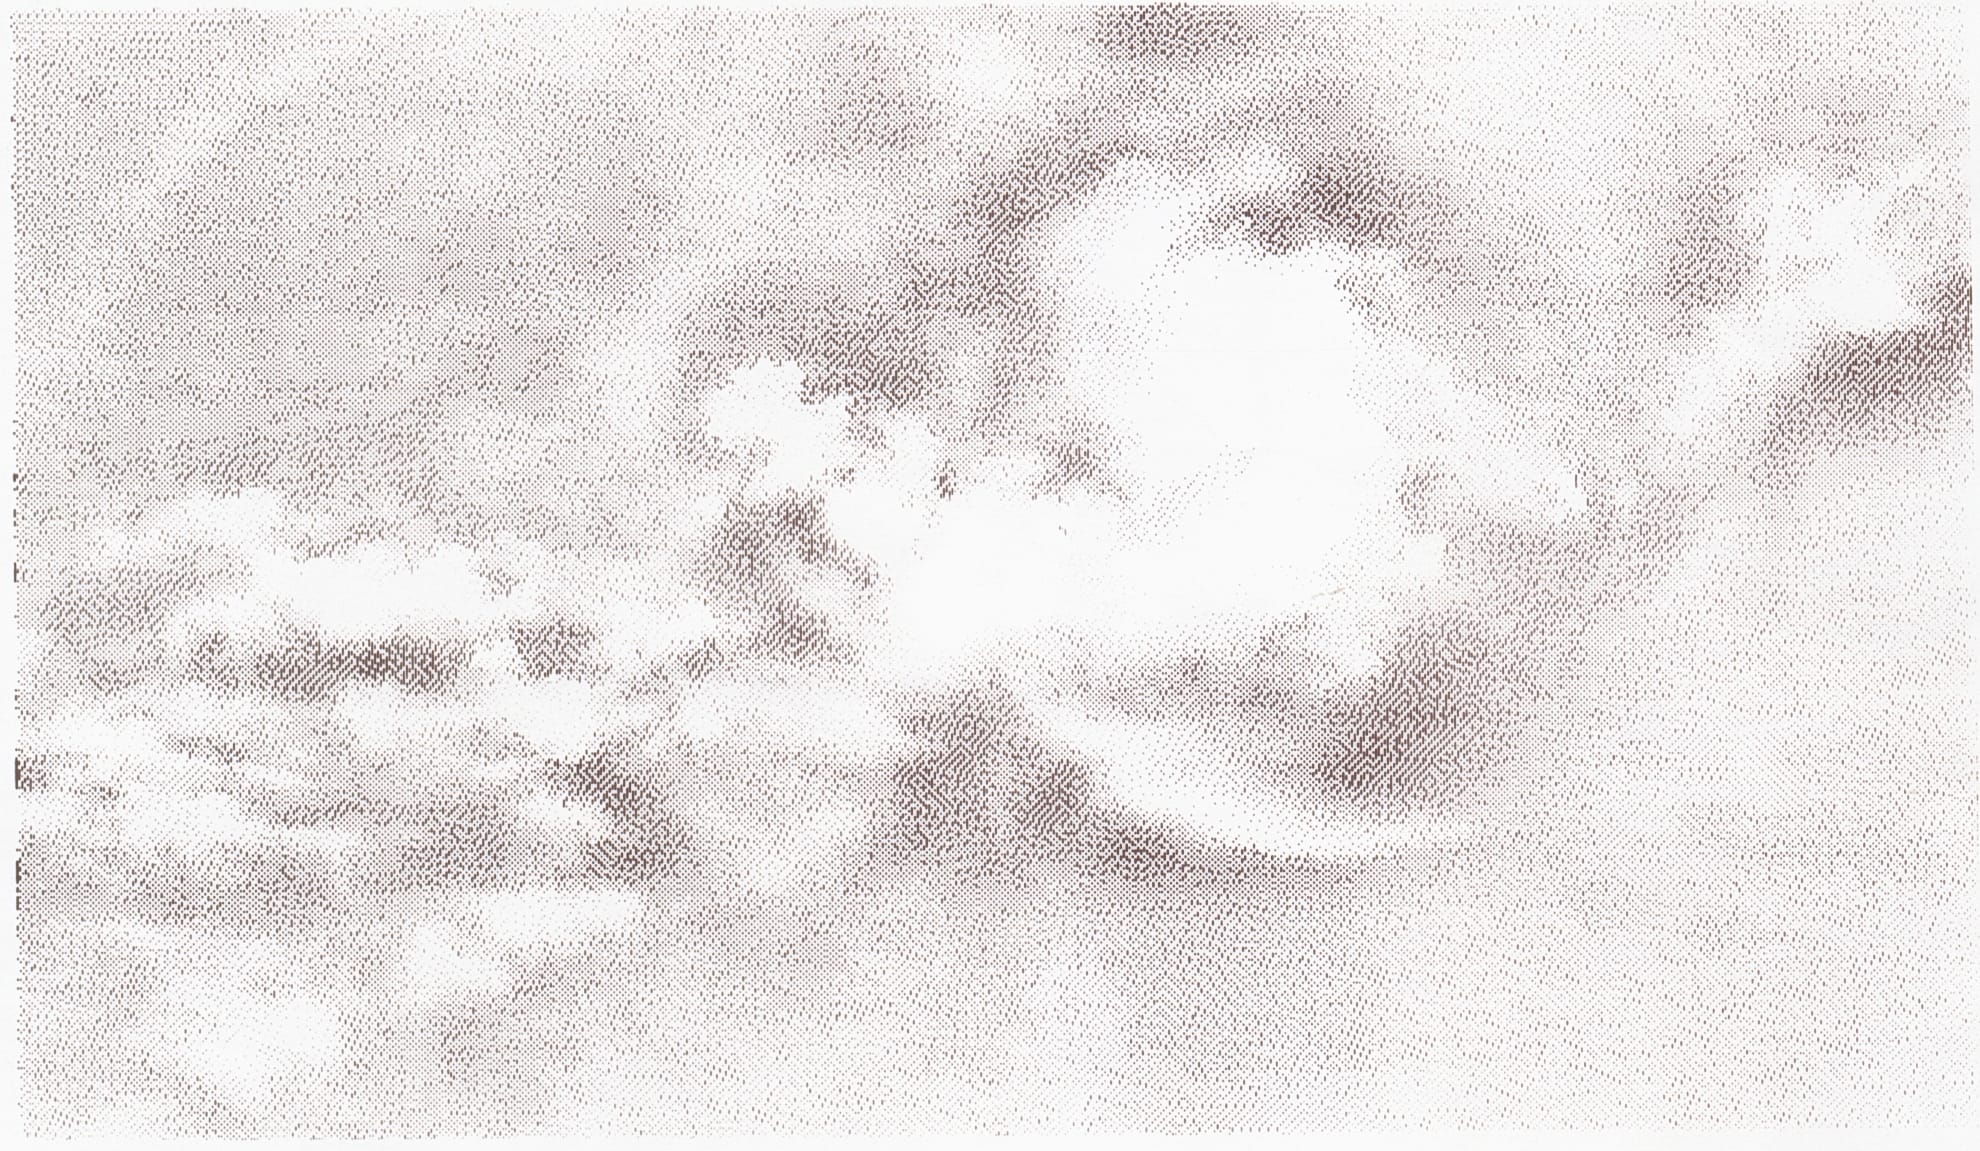 1-bit grayscale thermal print of a cloud formation in the sky spanning the whole horizontal frame